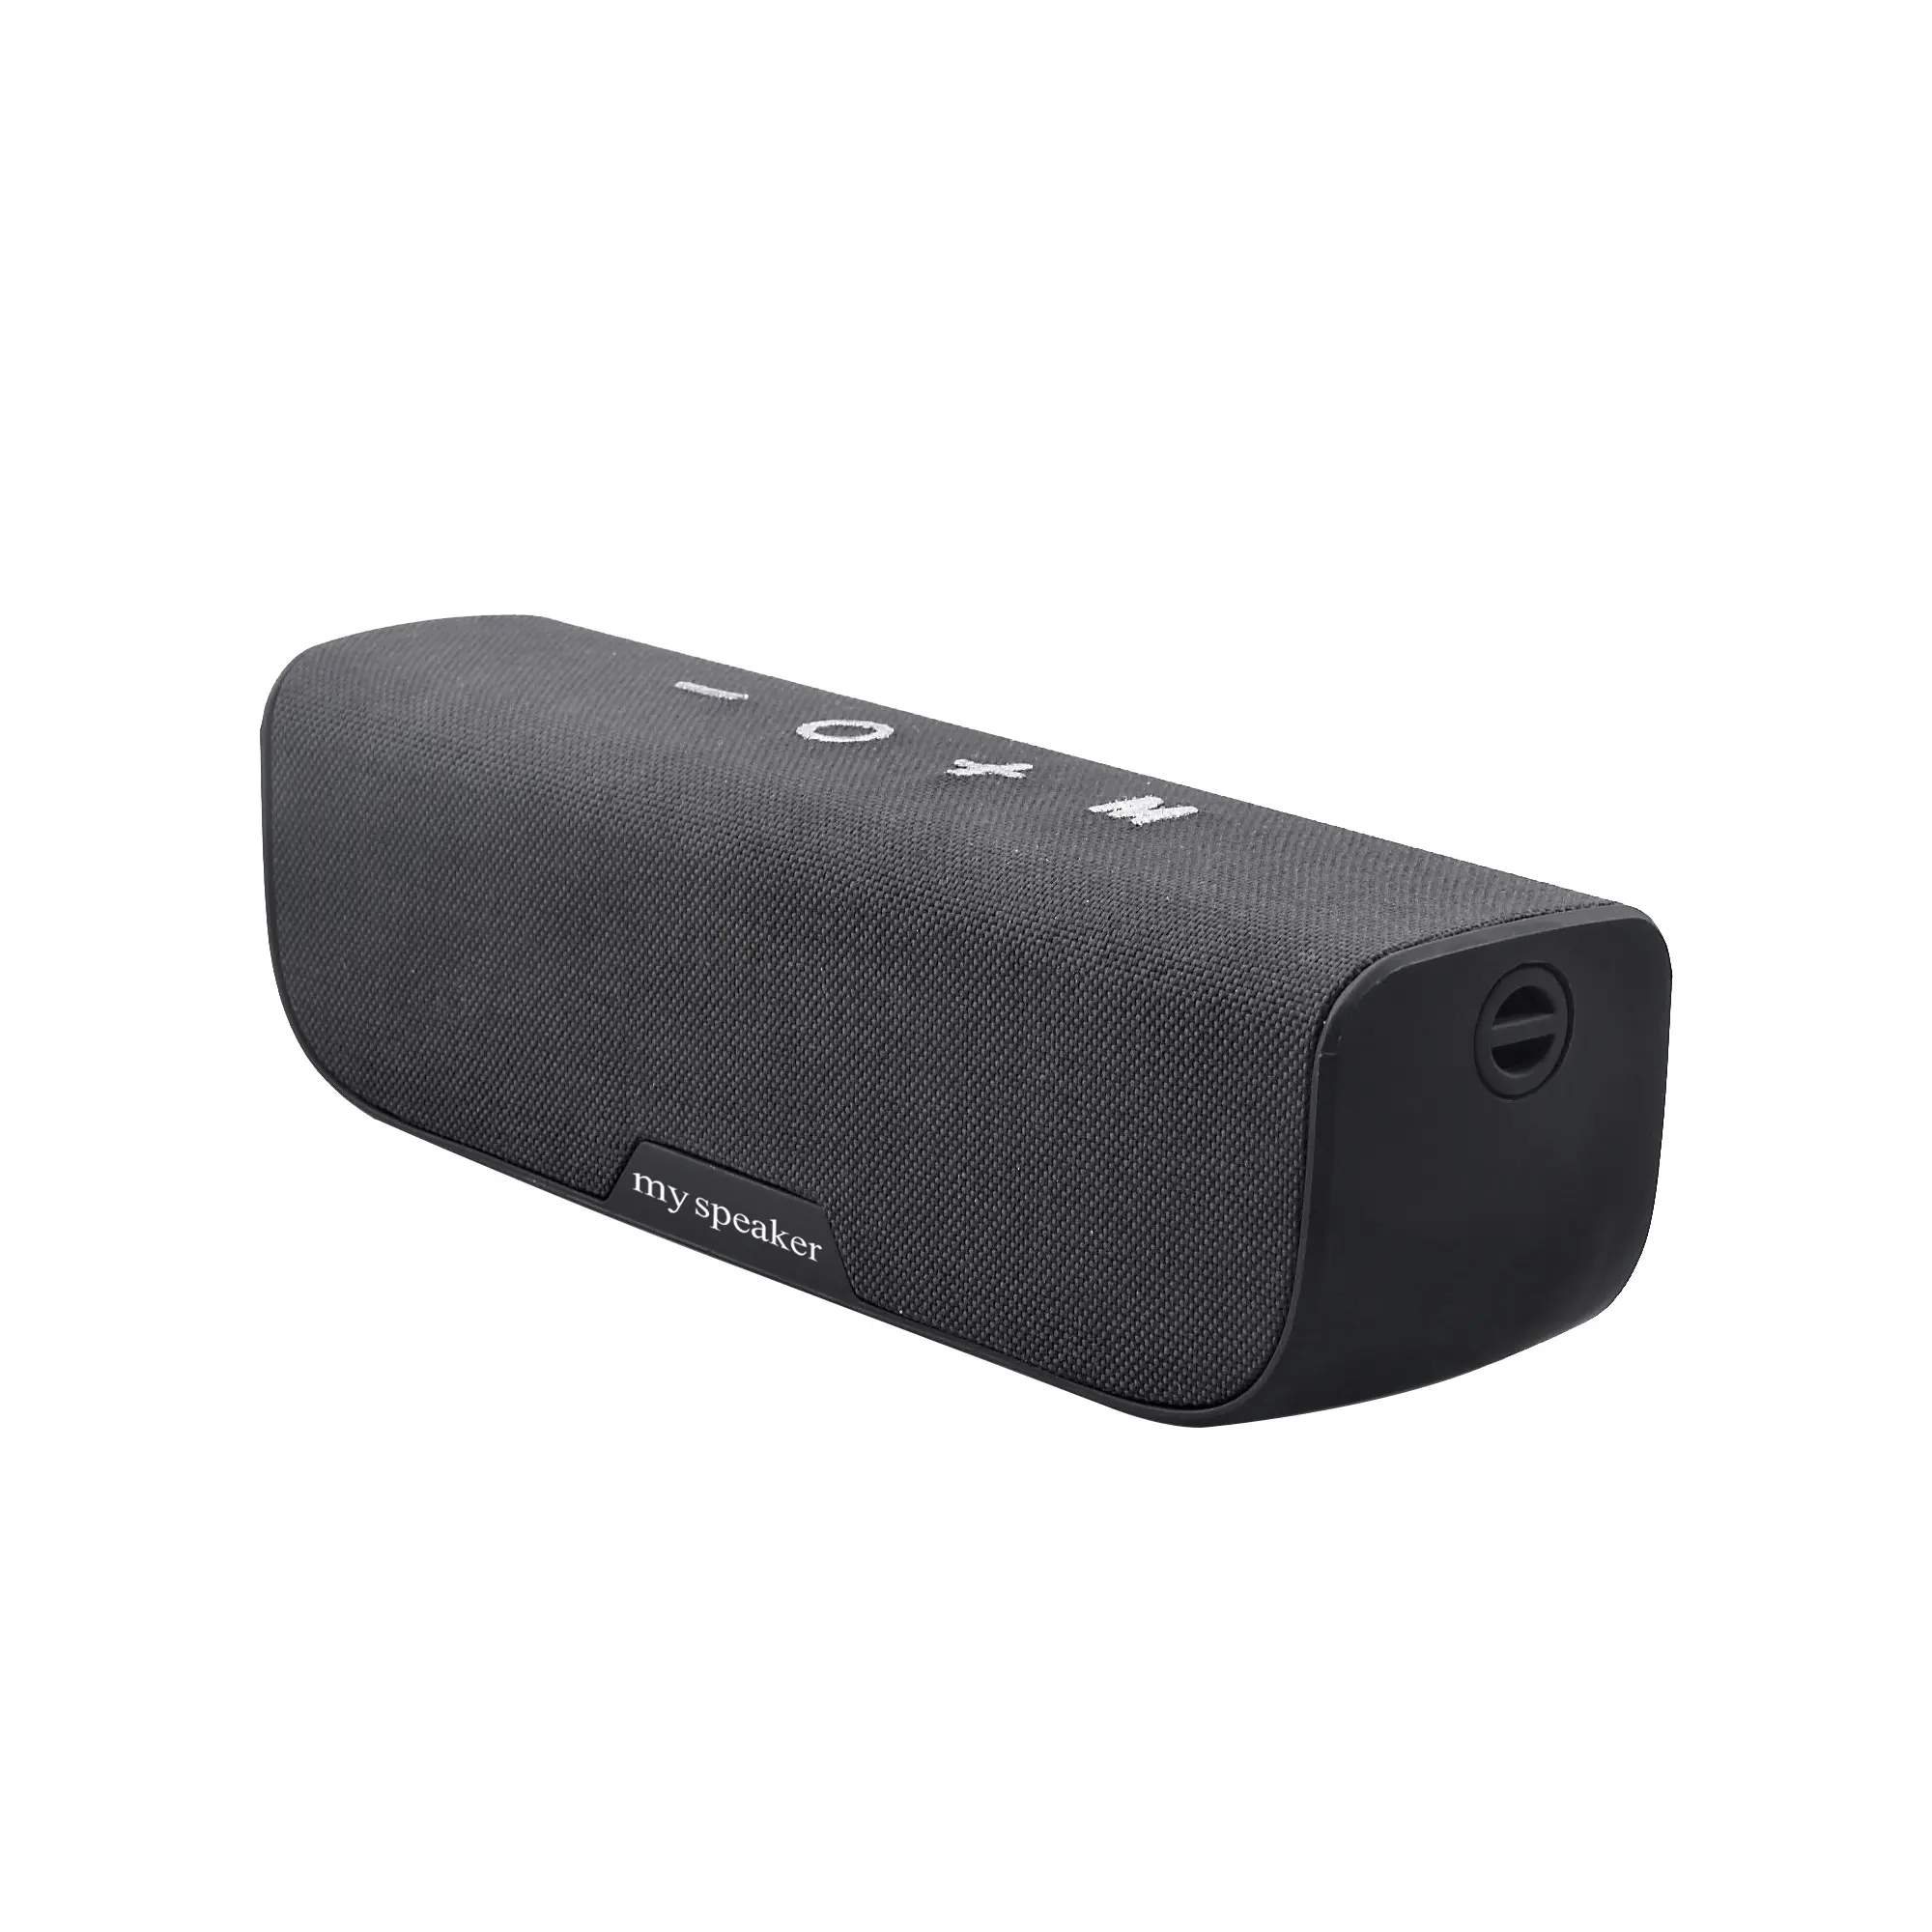 F018 Latest products waterproof IPX5 wireless portable stereo bluetooth speaker with FM radio and fabric design